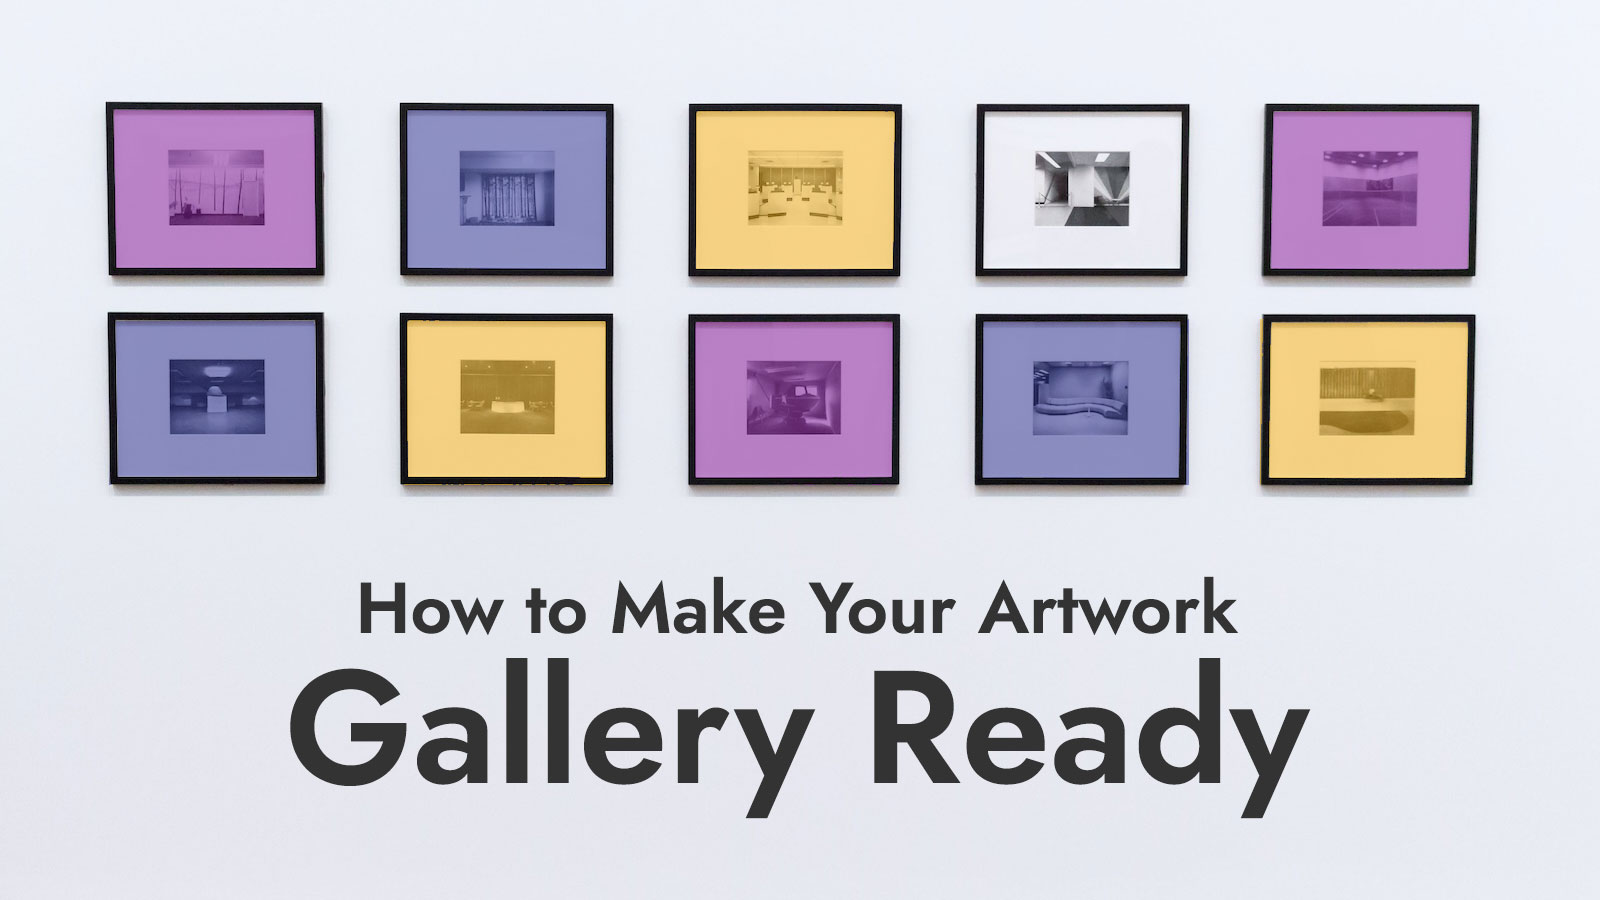 How to Make Your Artwork Gallery Ready